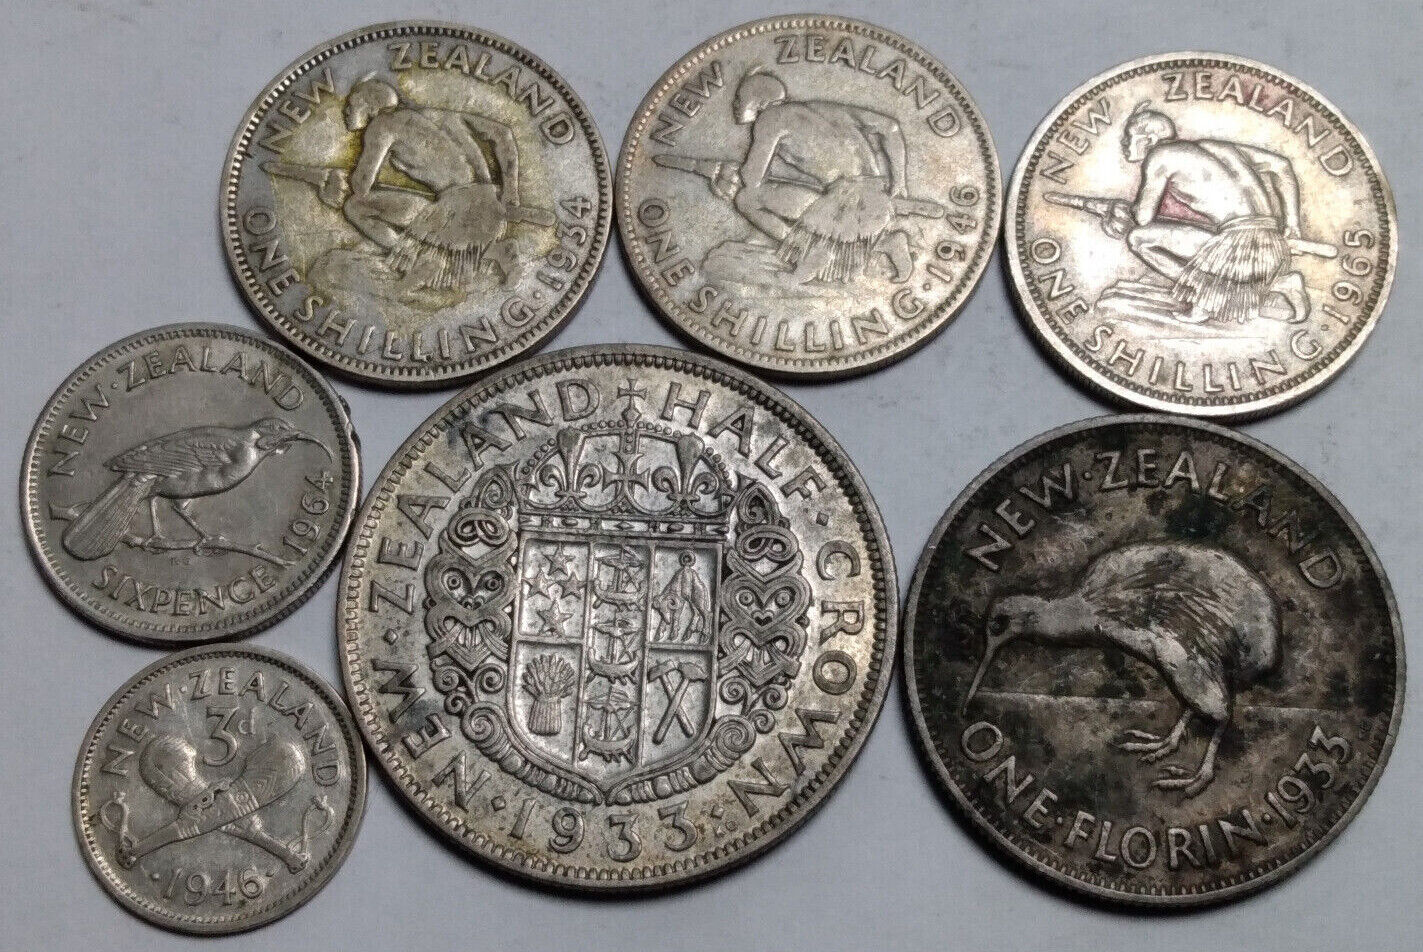 New Zealand Partial Type Set Silver Half Crown to 3 Pence 1933-1965 Lot 7x Coins Без бренда